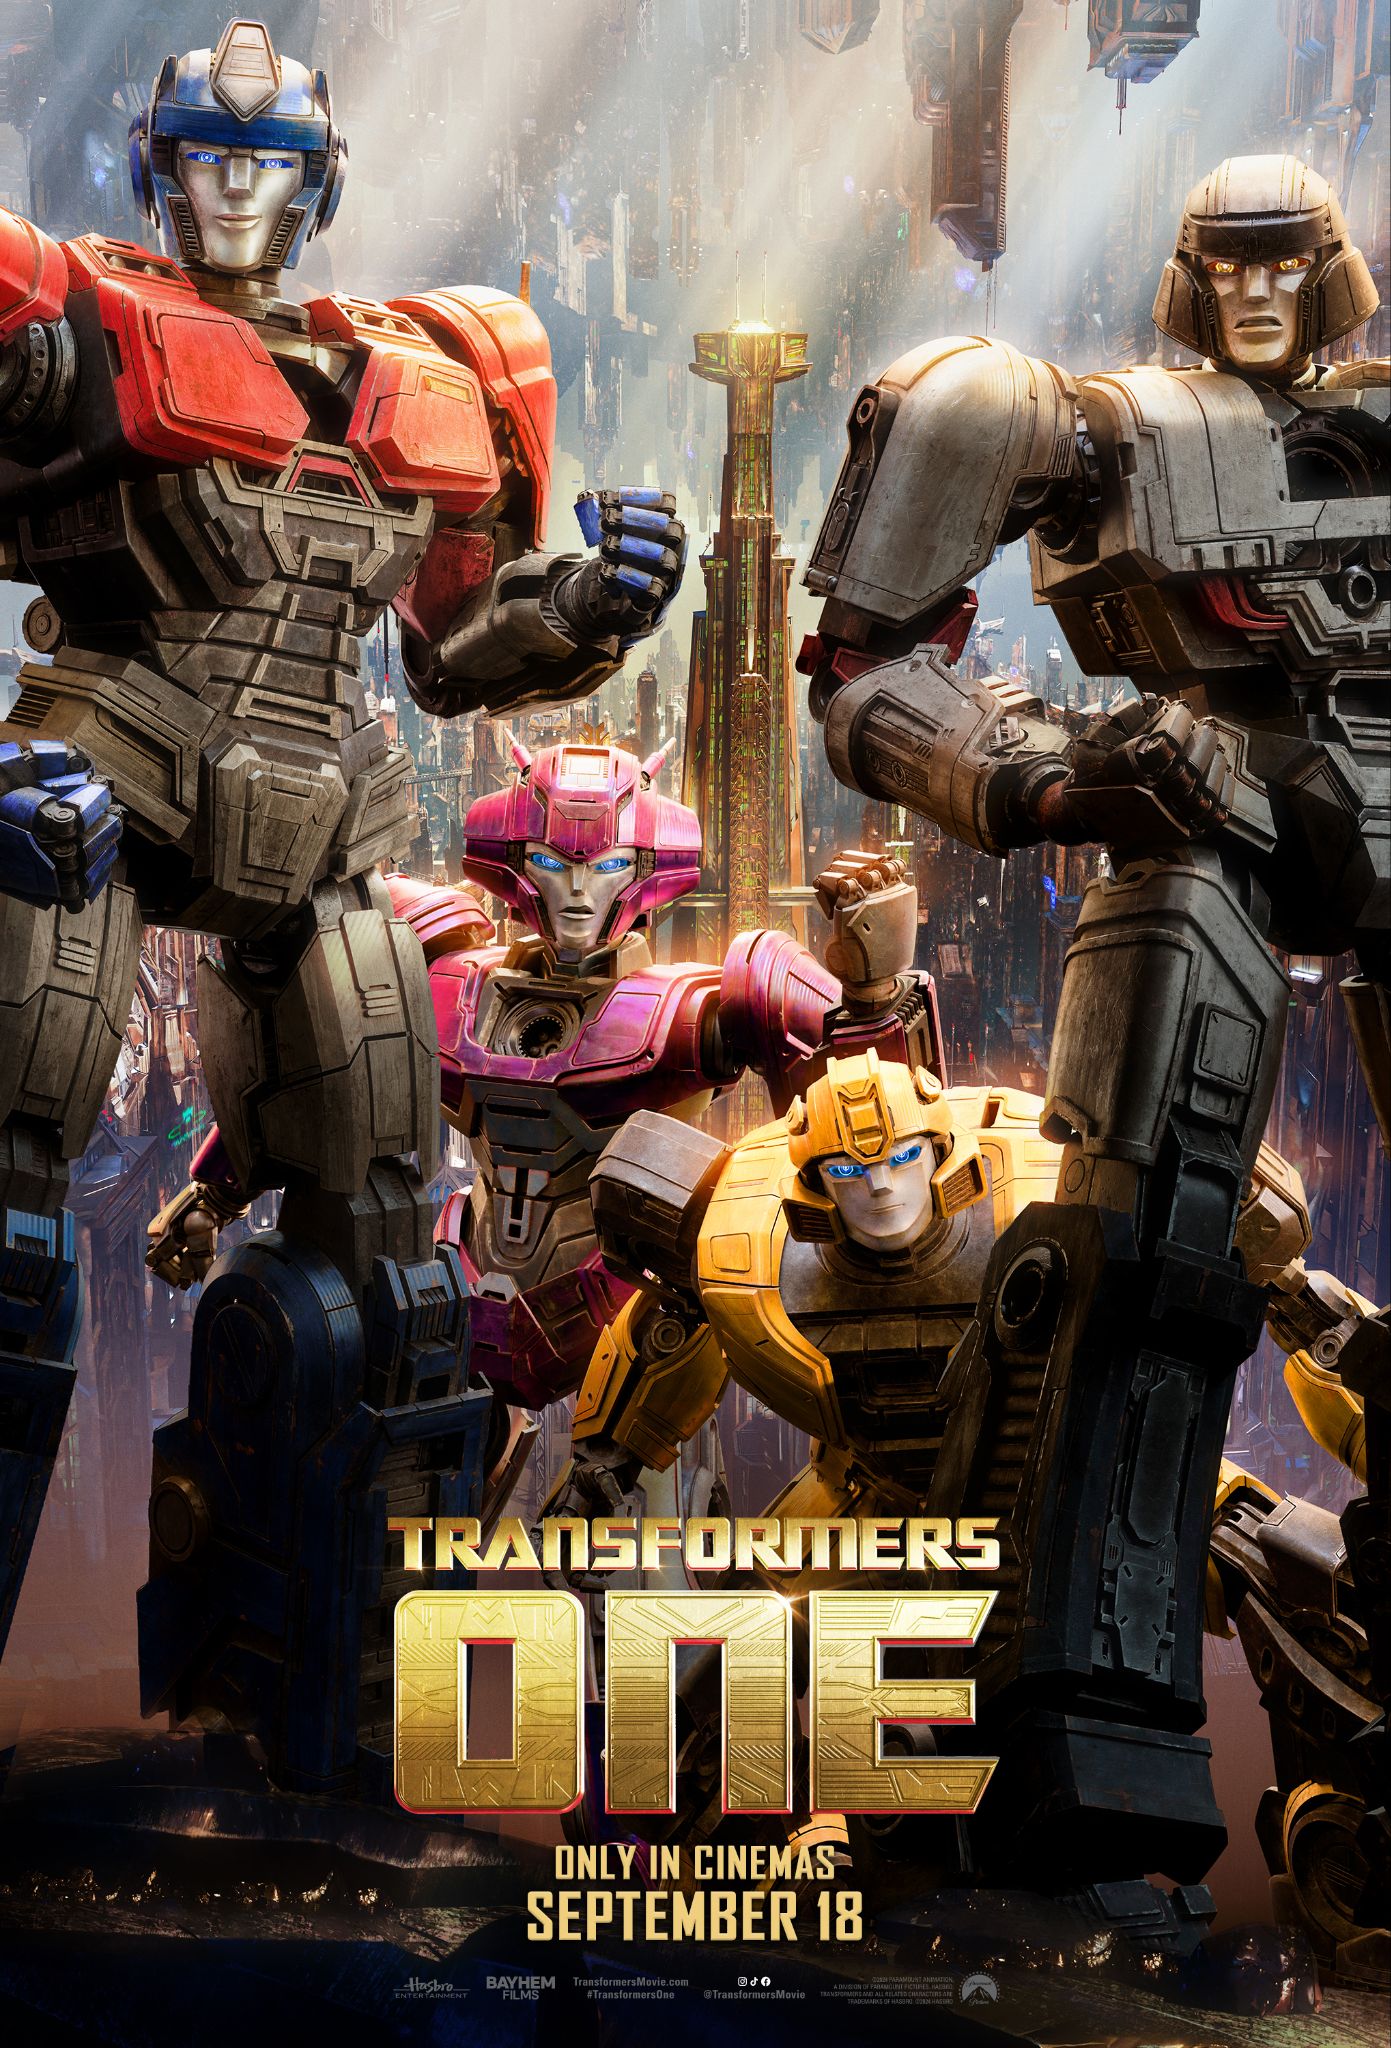 WATCH: "TRANSFORMERS ONE" Launches Official Trailer